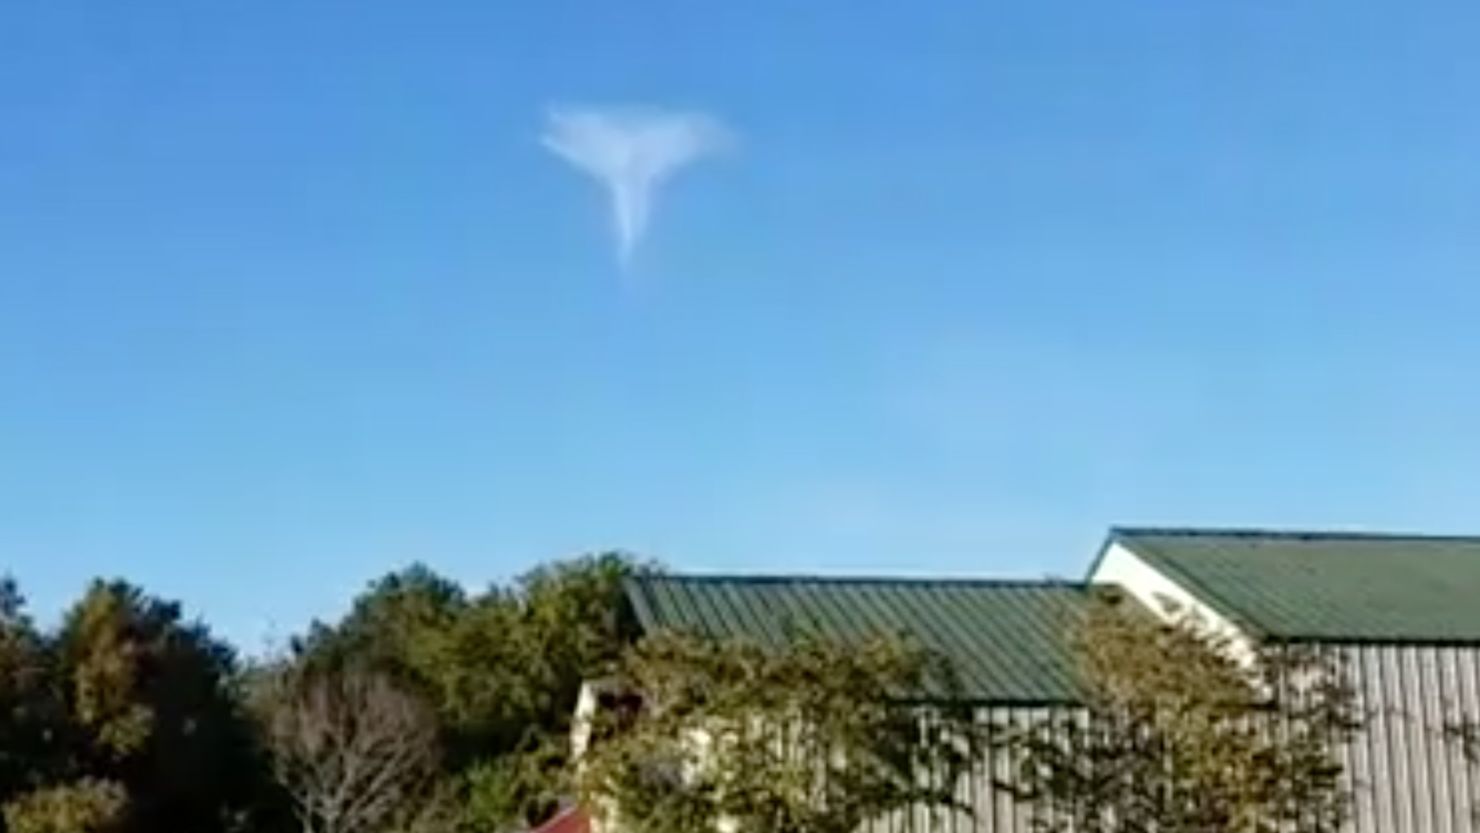 Cory Hearon snapped this image of what looks like an angel floating in the sky.